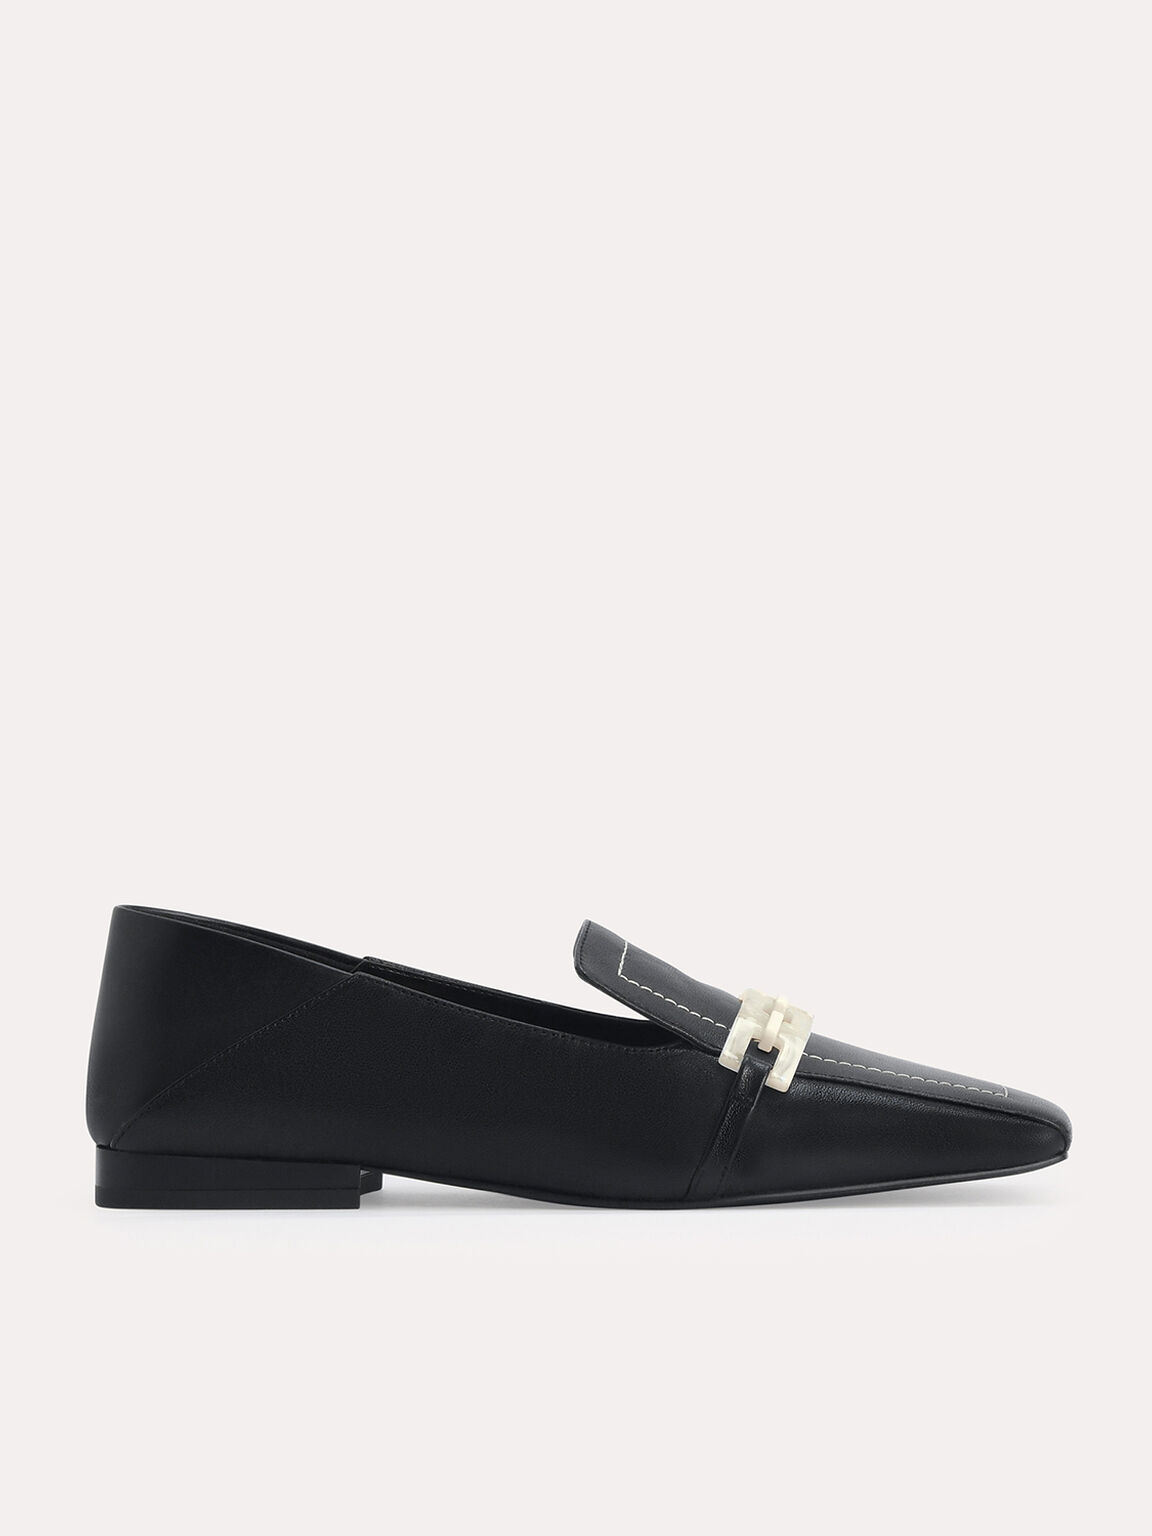 Leather Square Toe Loafers, Black